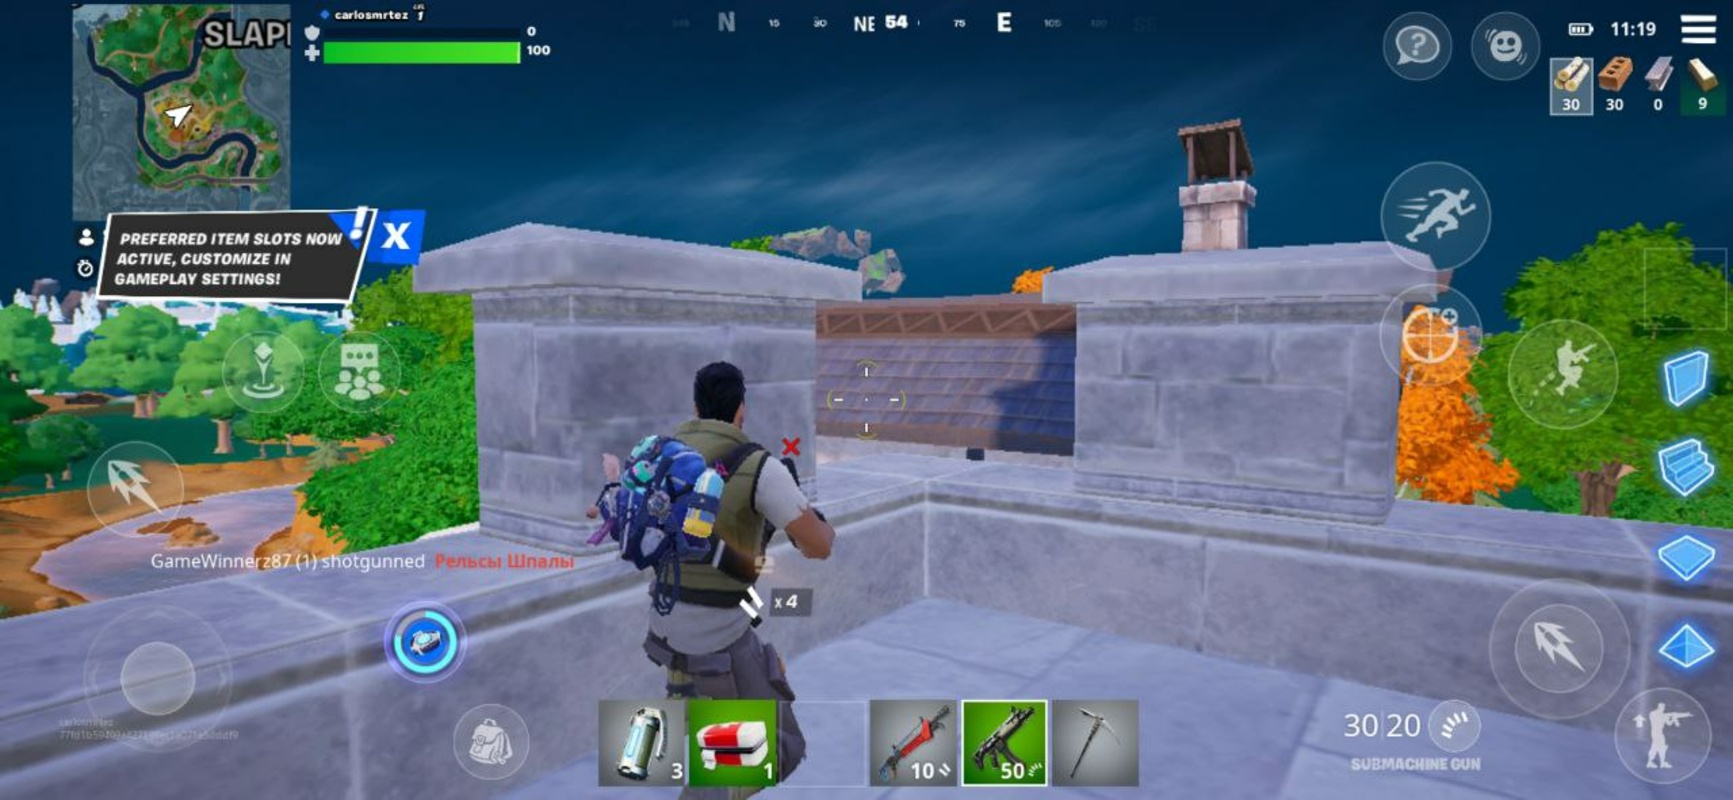 Fortnite 29.10.0-32391220-Android APK for Android Screenshot 10